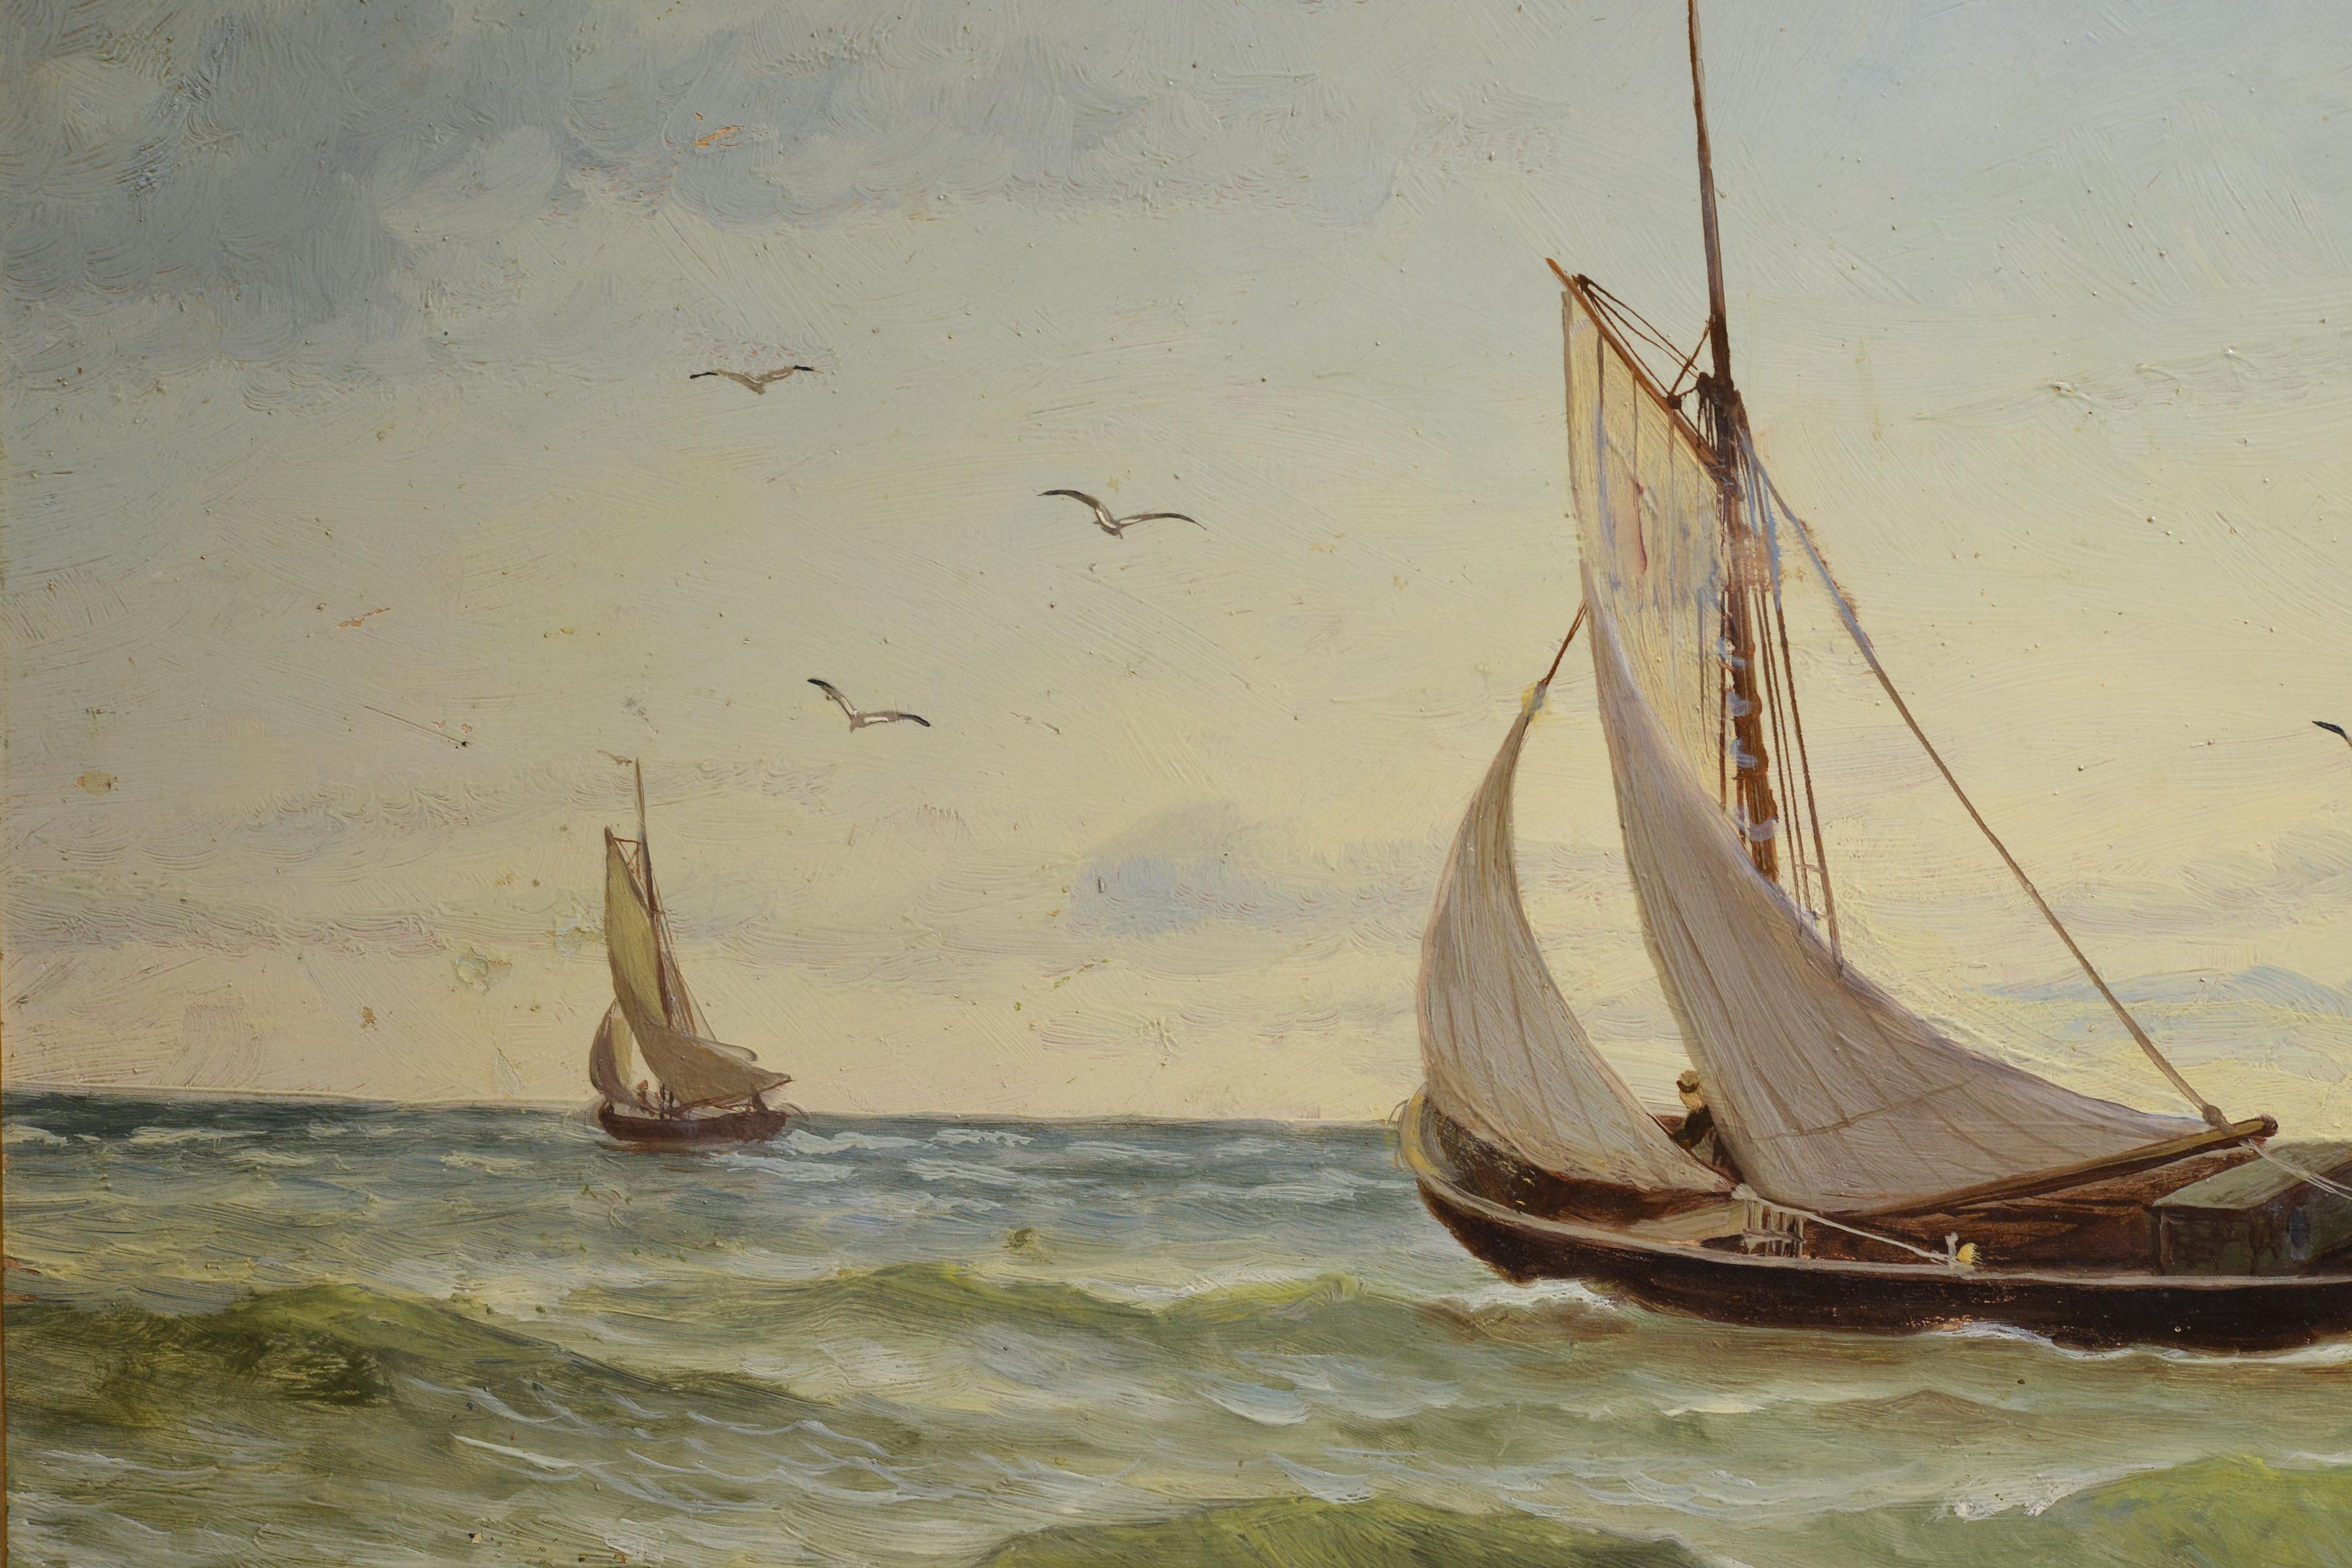 This artwork showcases the beauty of sailing boats and ships sailing gracefully on the sea waters. The artist's attention to detail is evident in the intricate depiction of the ships' rigging, sails, and the gentle movement of the waves. The